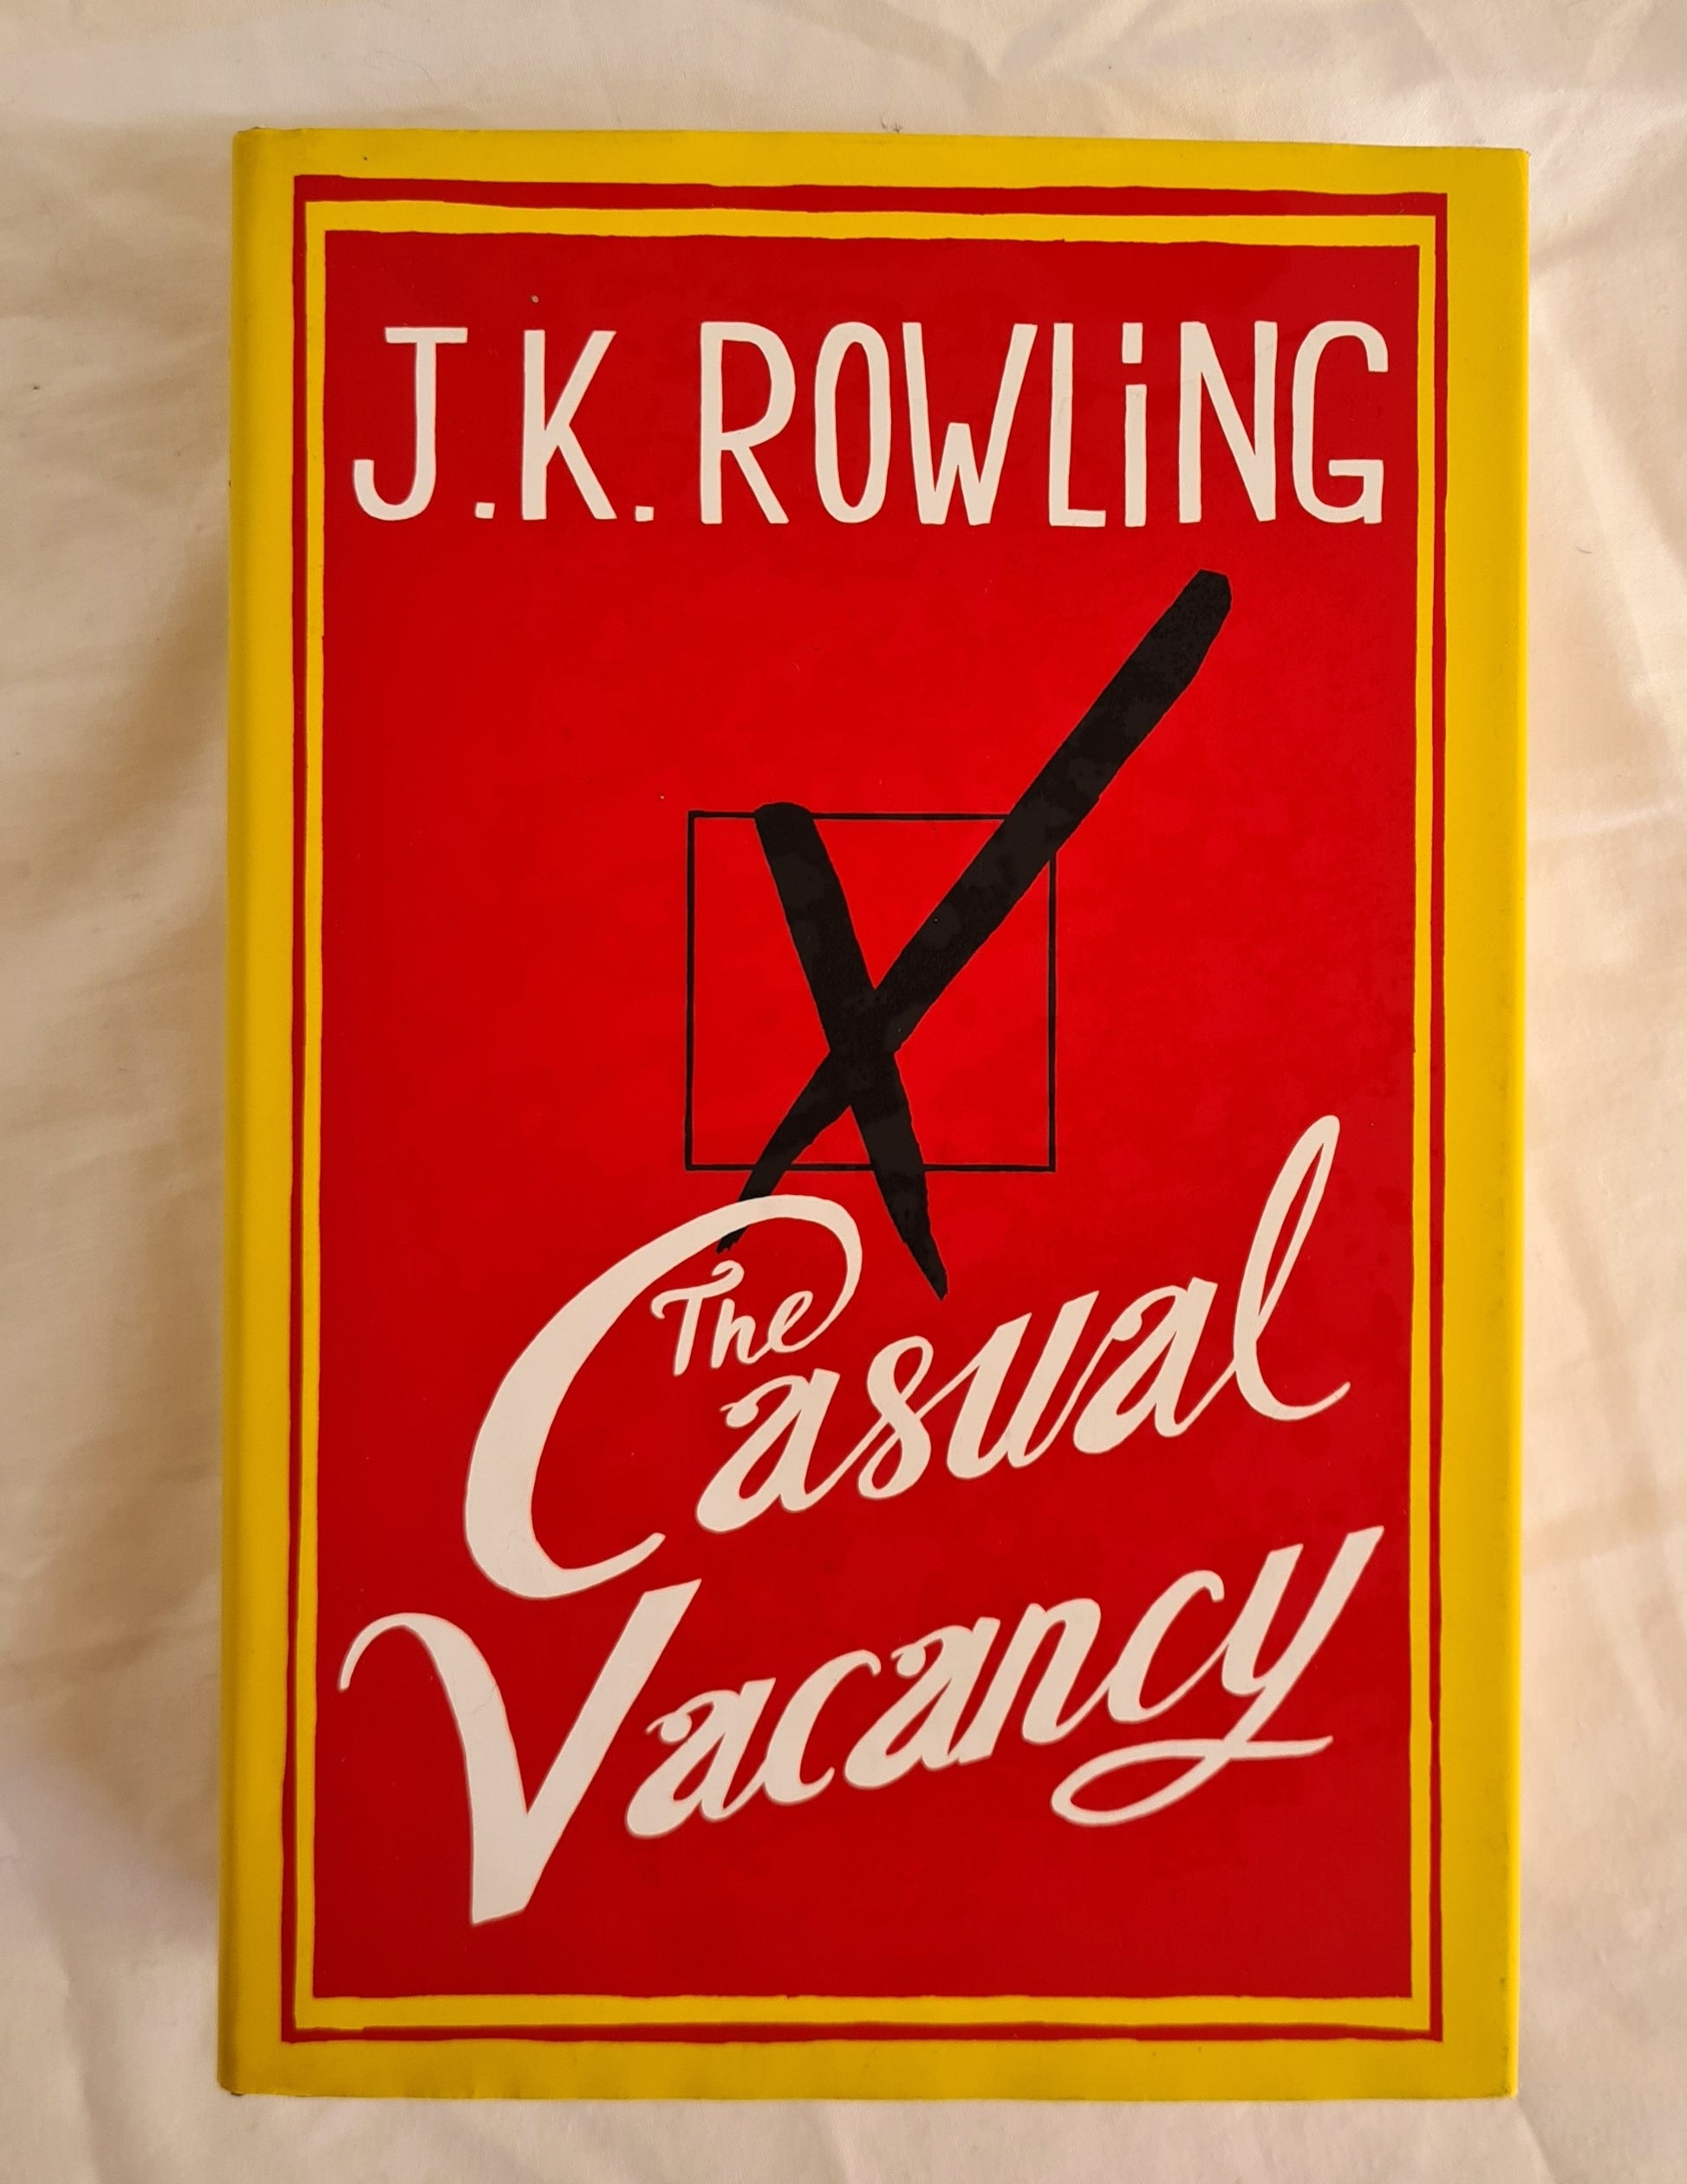 The Casual Vacancy  by J. K. Rowling